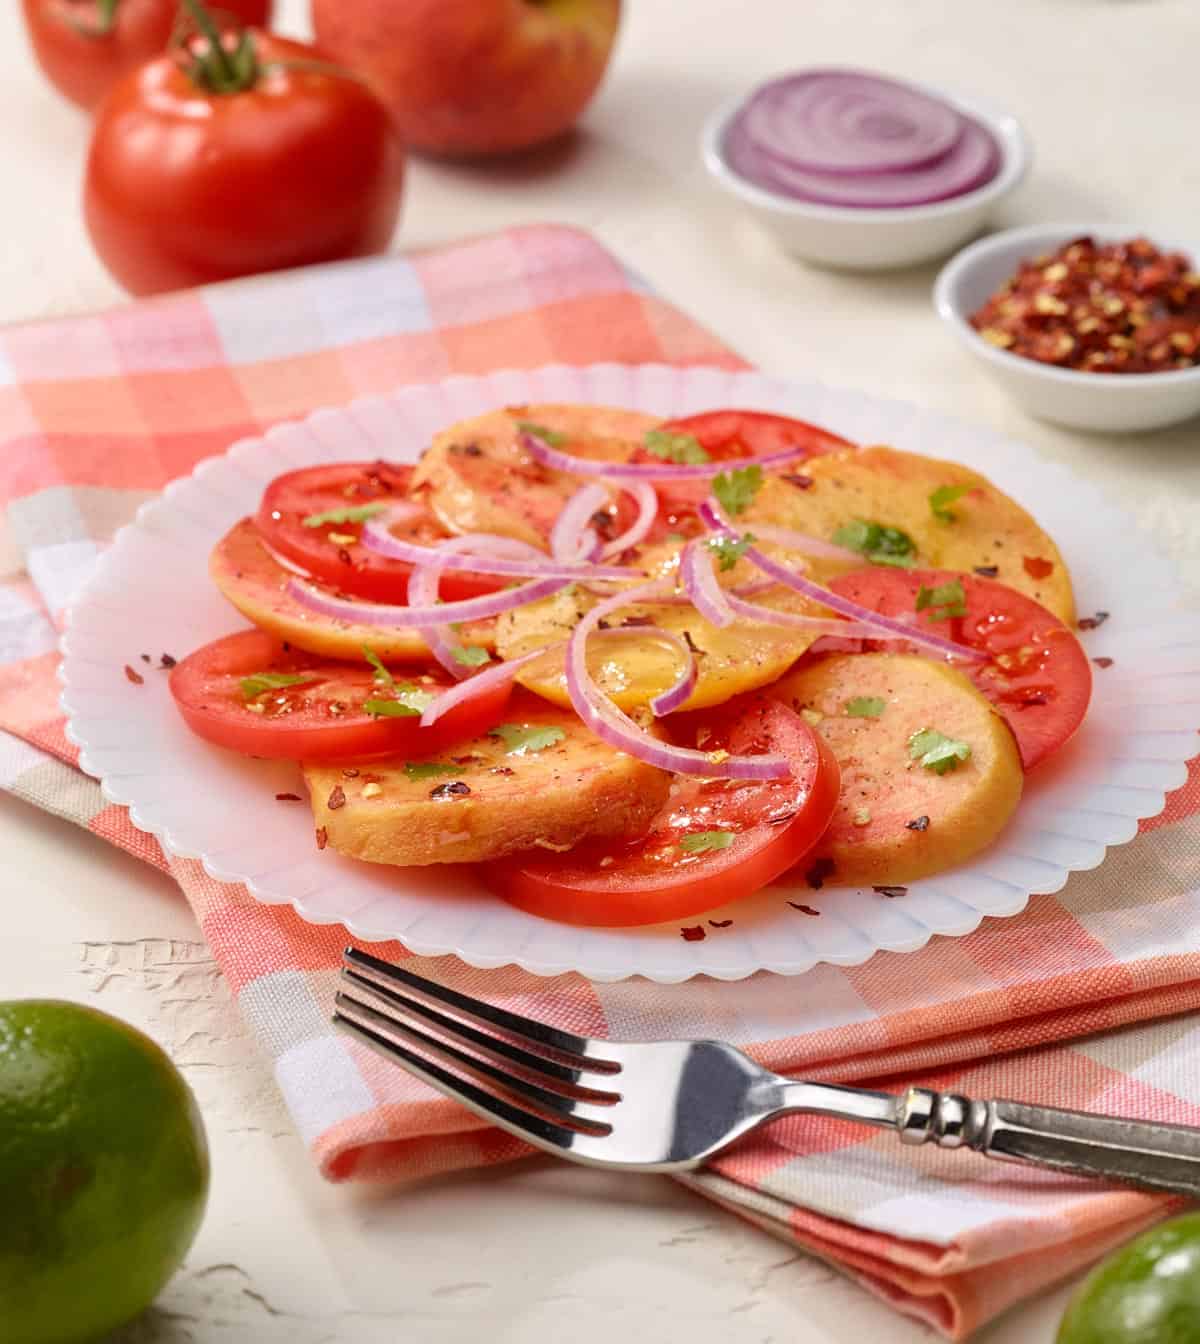 Round white plate filled with Tomato Peach Salad with Lime Dressing